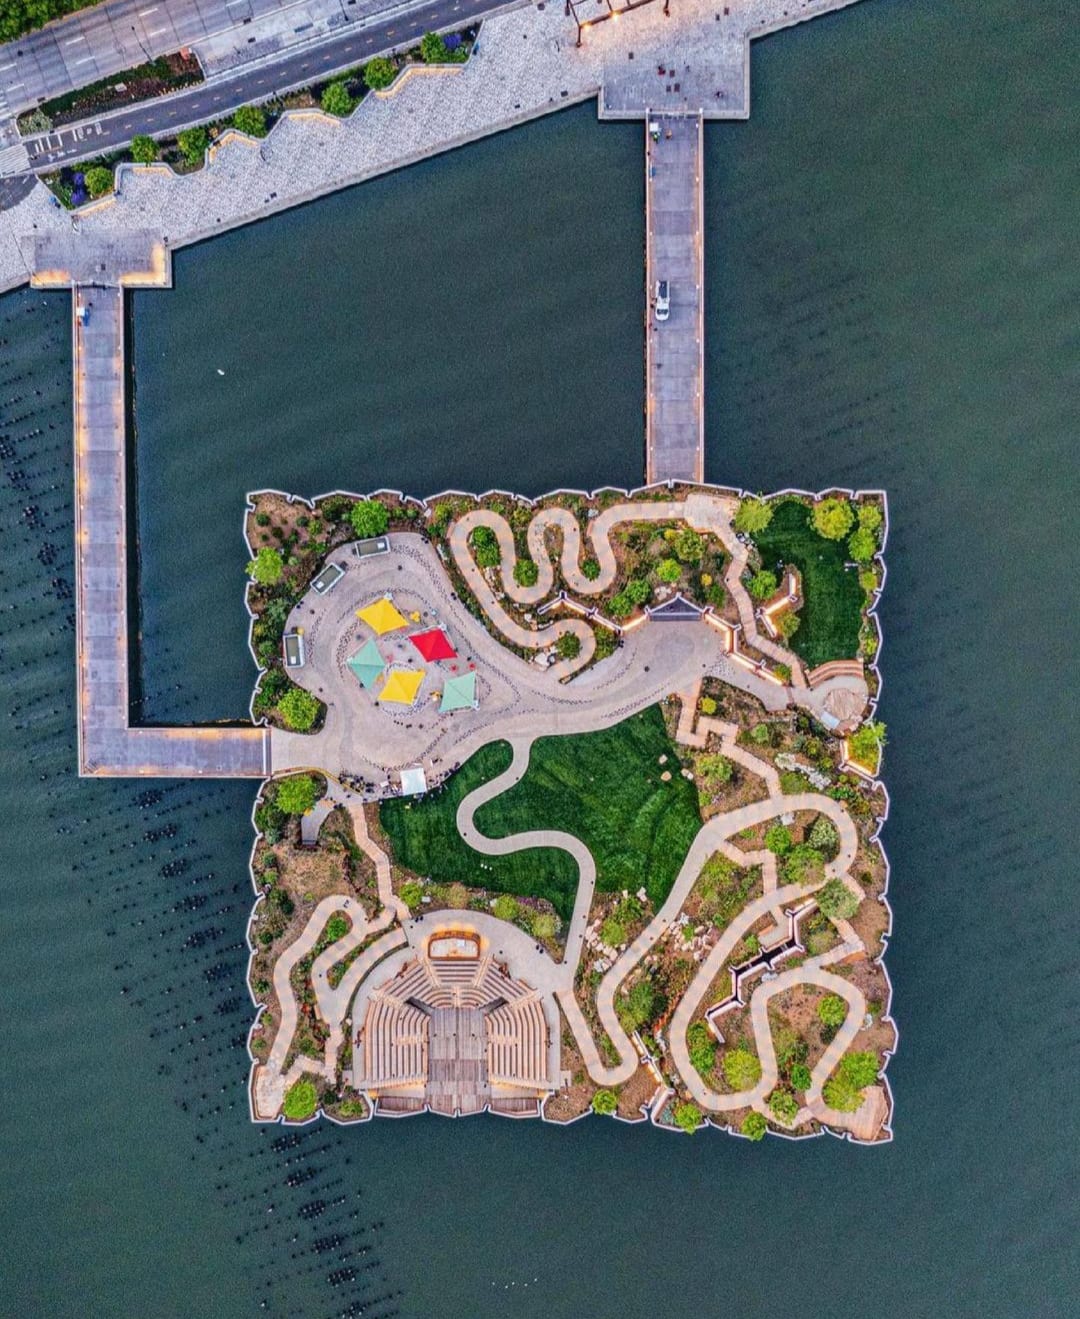 The newly opened Little Island is a free public park in Manhattan, New York City that is perched above the Hudson river on 132 concrete 'tulips'.